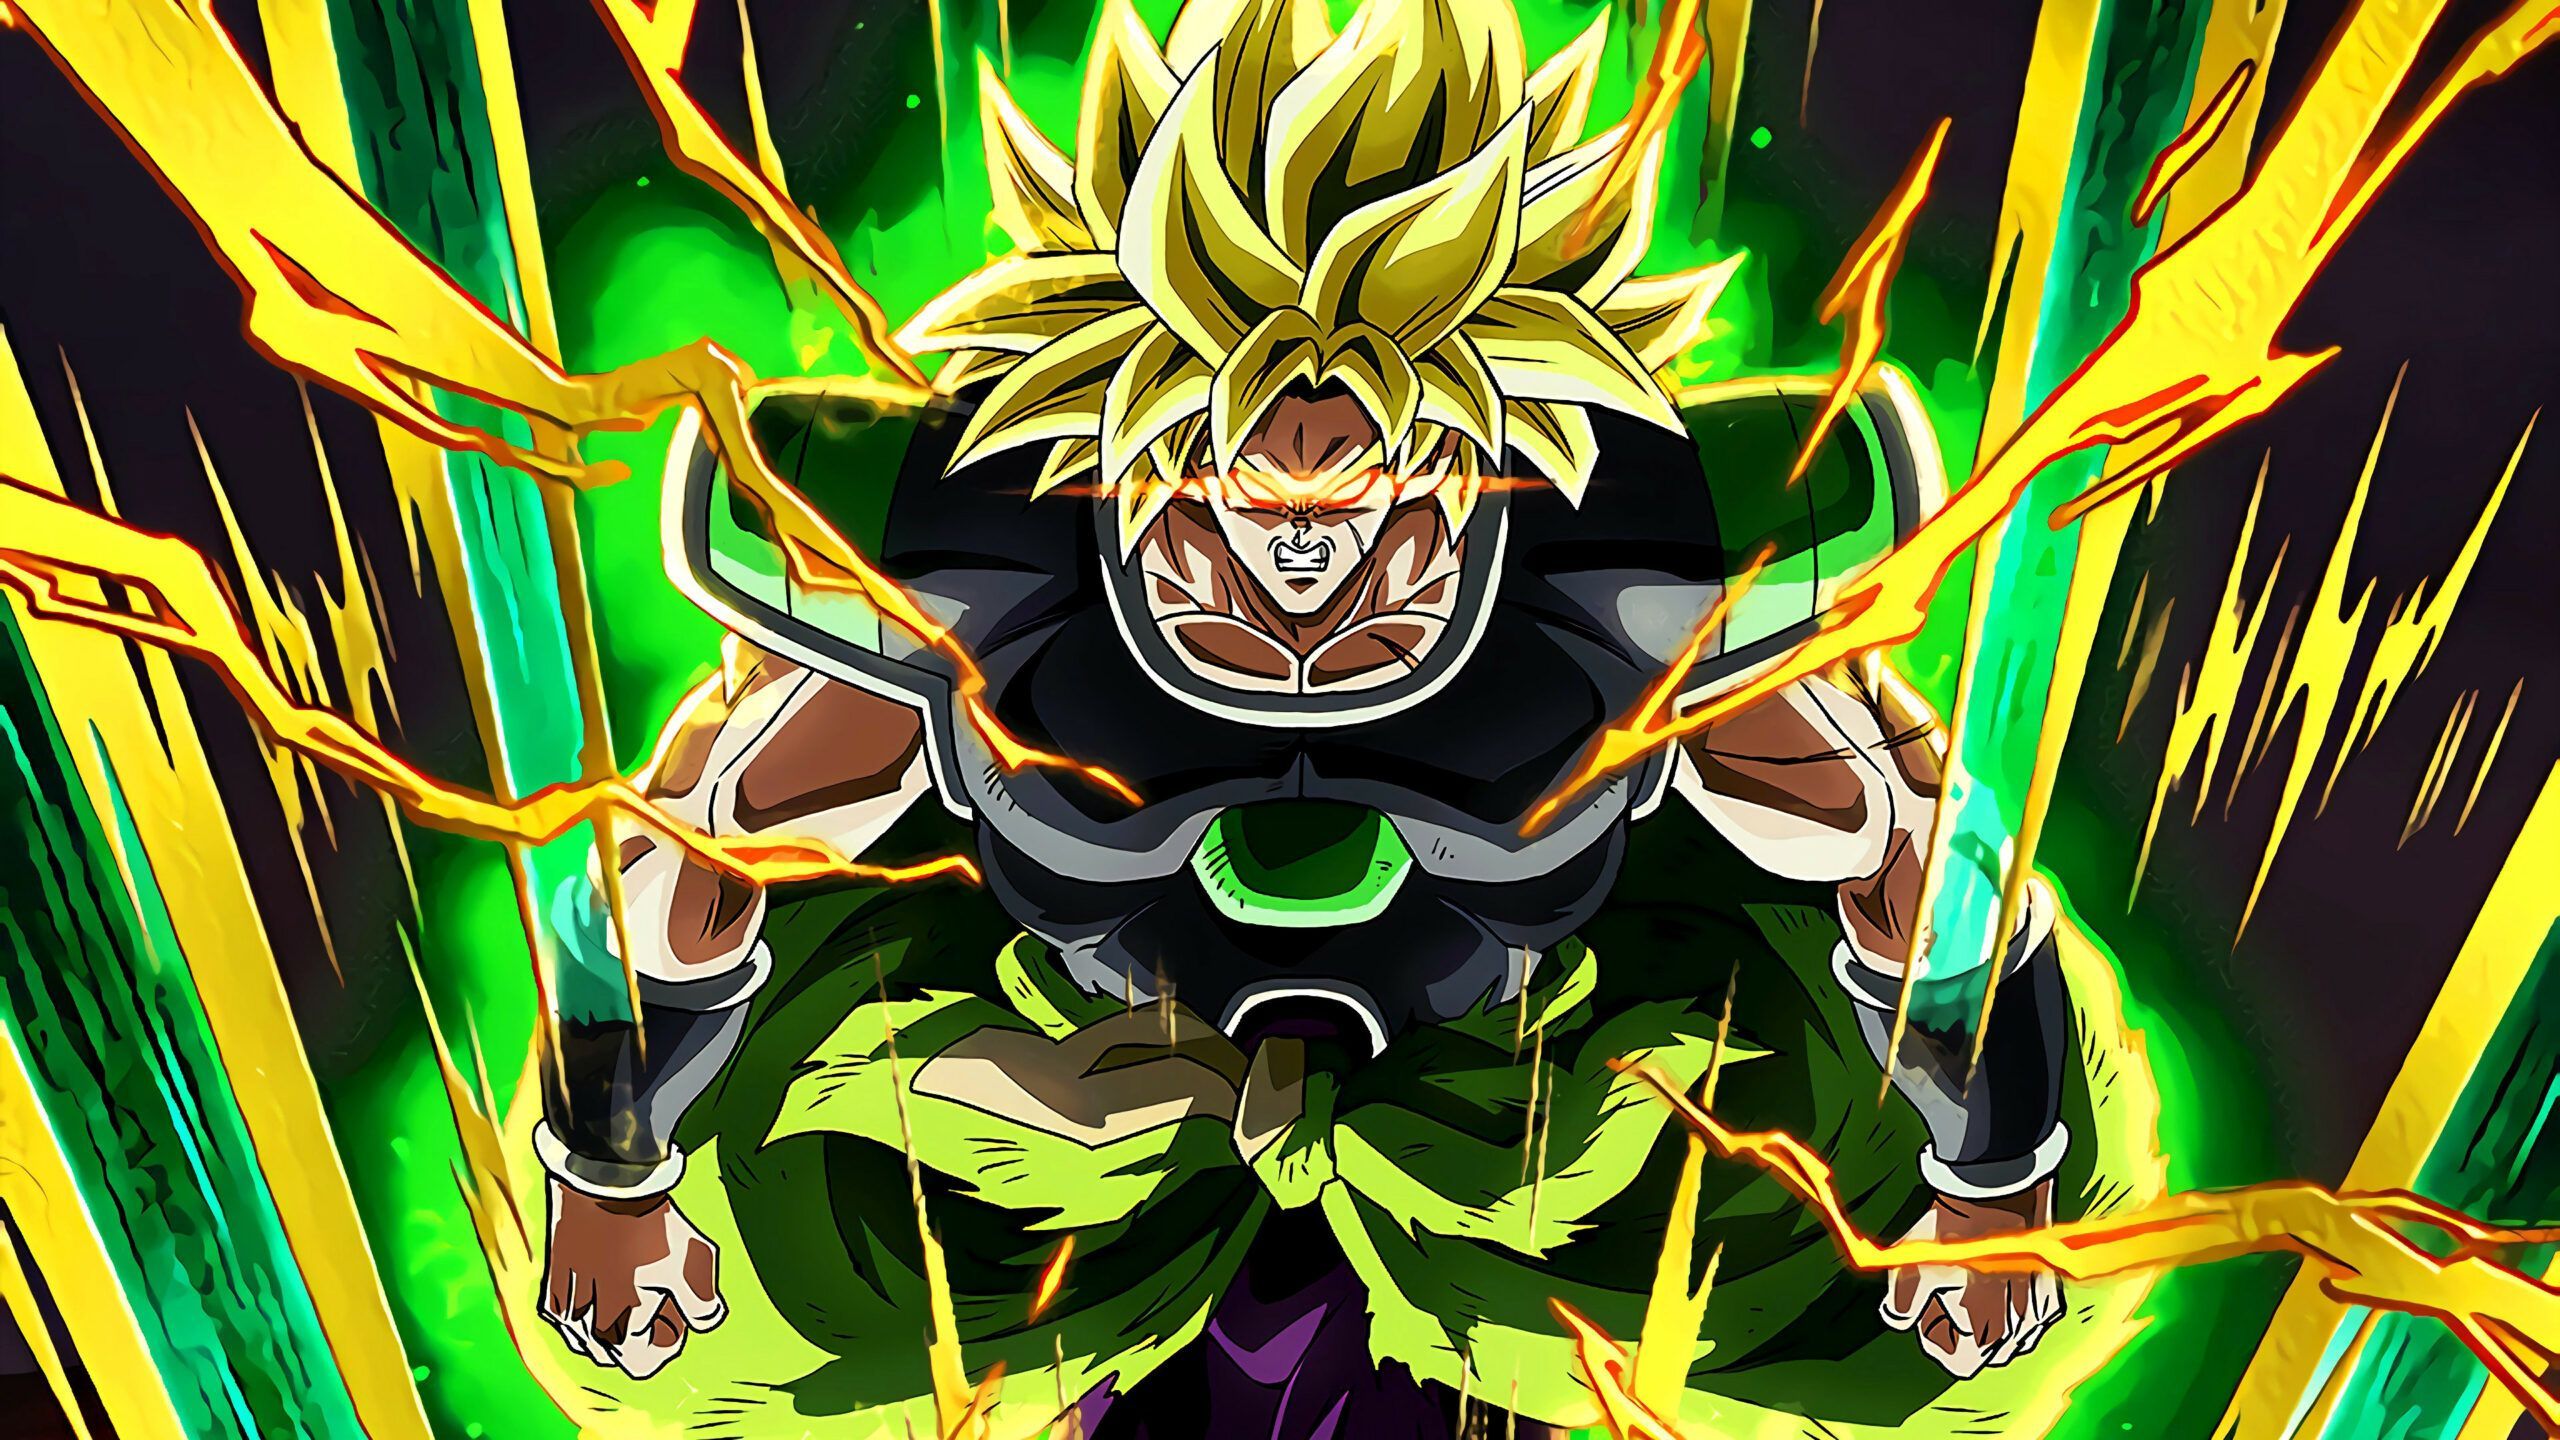 Broly Wallpapers 4k Hd Broly Backgrounds On Wallpaperbat